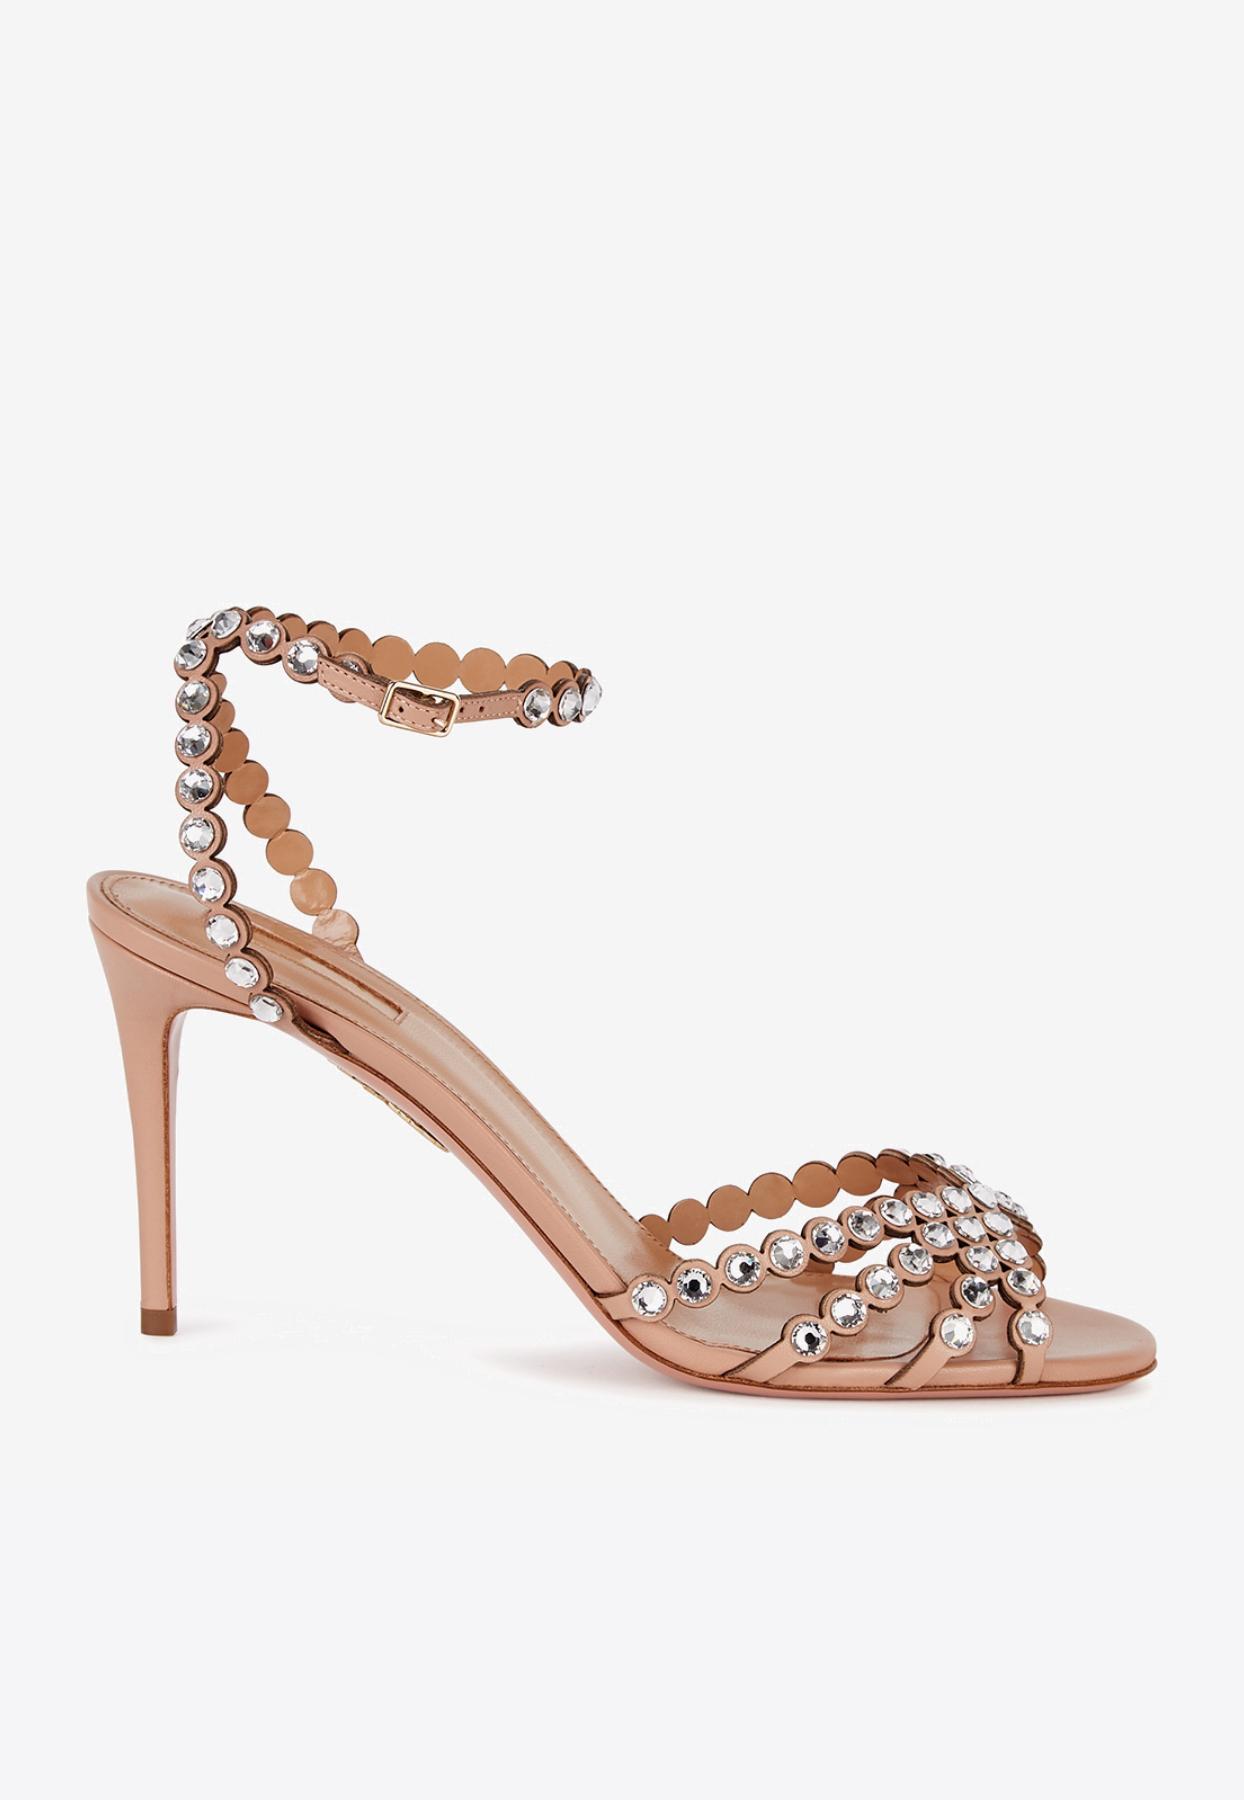 Aquazzura Tequila 85 Crystal Embellished Sandals In Nappa Leather Lyst